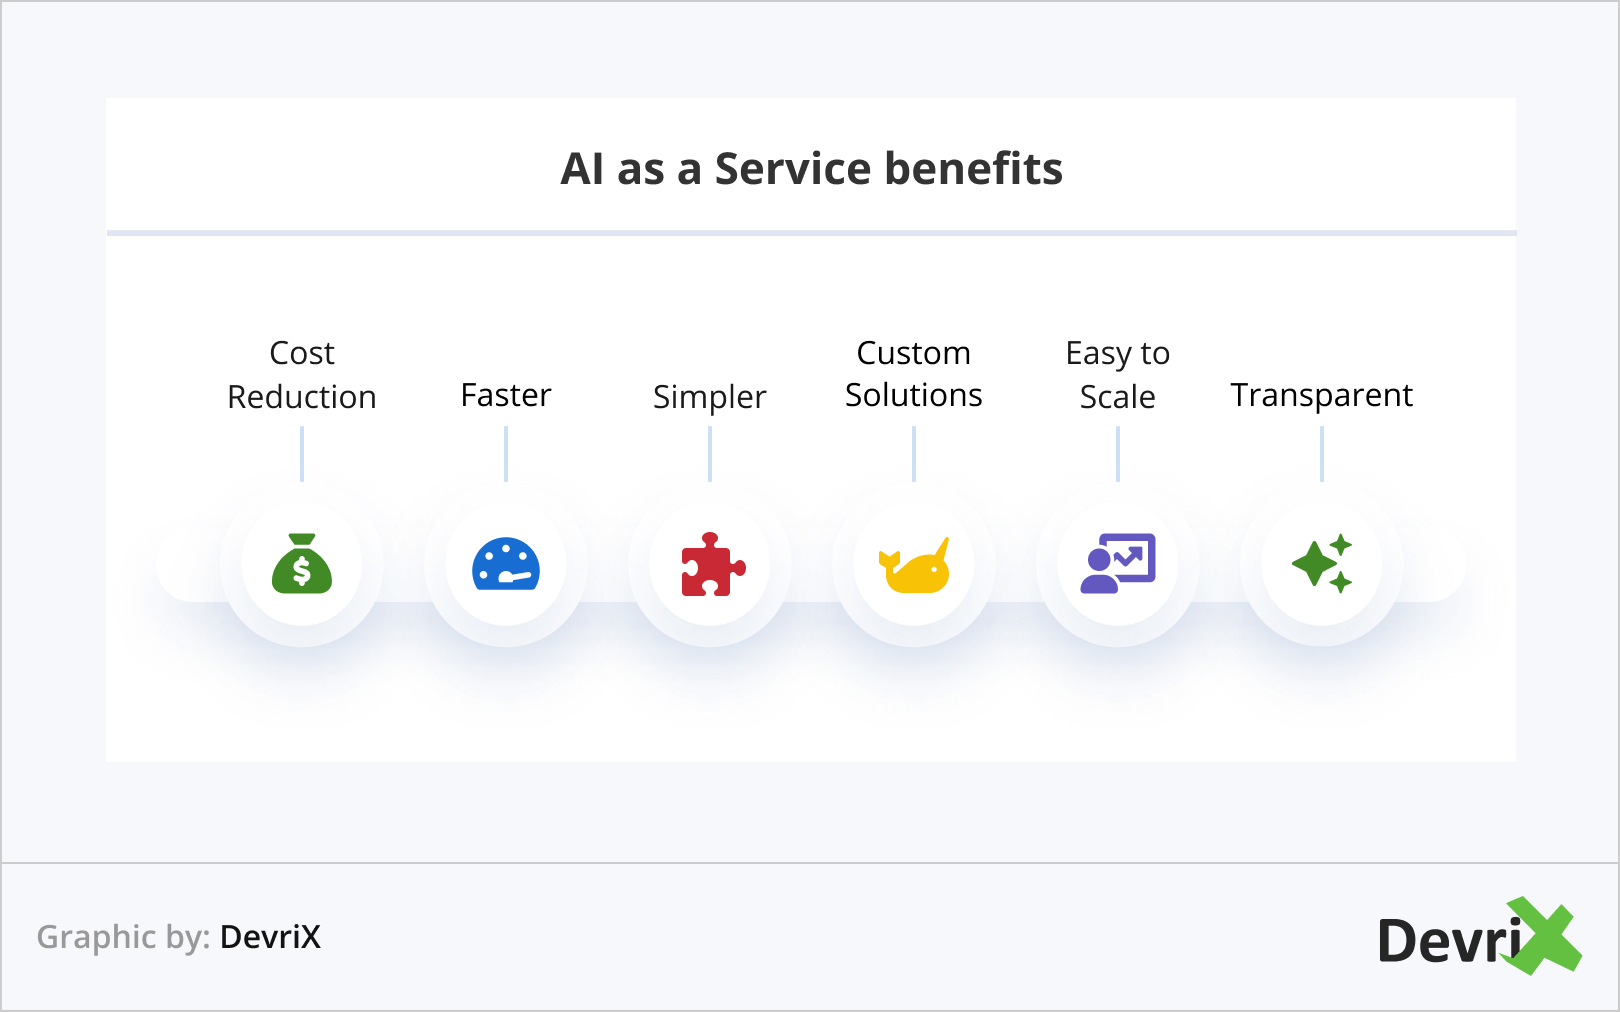 Summary of AI as a Service advantages including cost reduction, speed, simplicity, customization, scalability, and transparency with corresponding icons.